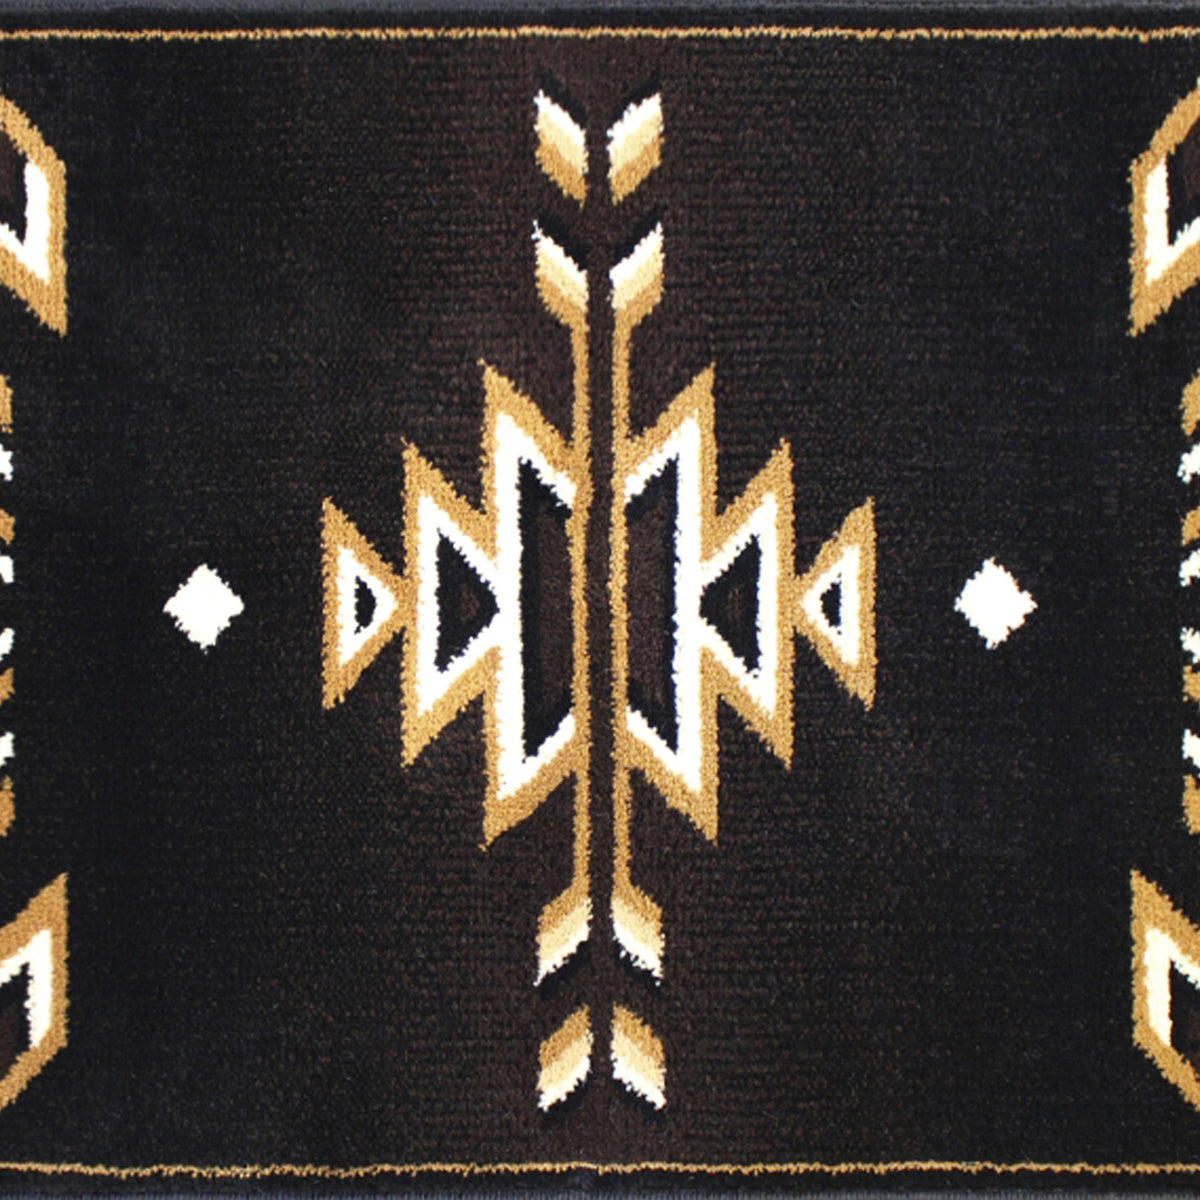 Brown,2' x 3' |#| Southwestern Style Area Rug in Shades of Brown, Beige, and Black - 2' x 3'